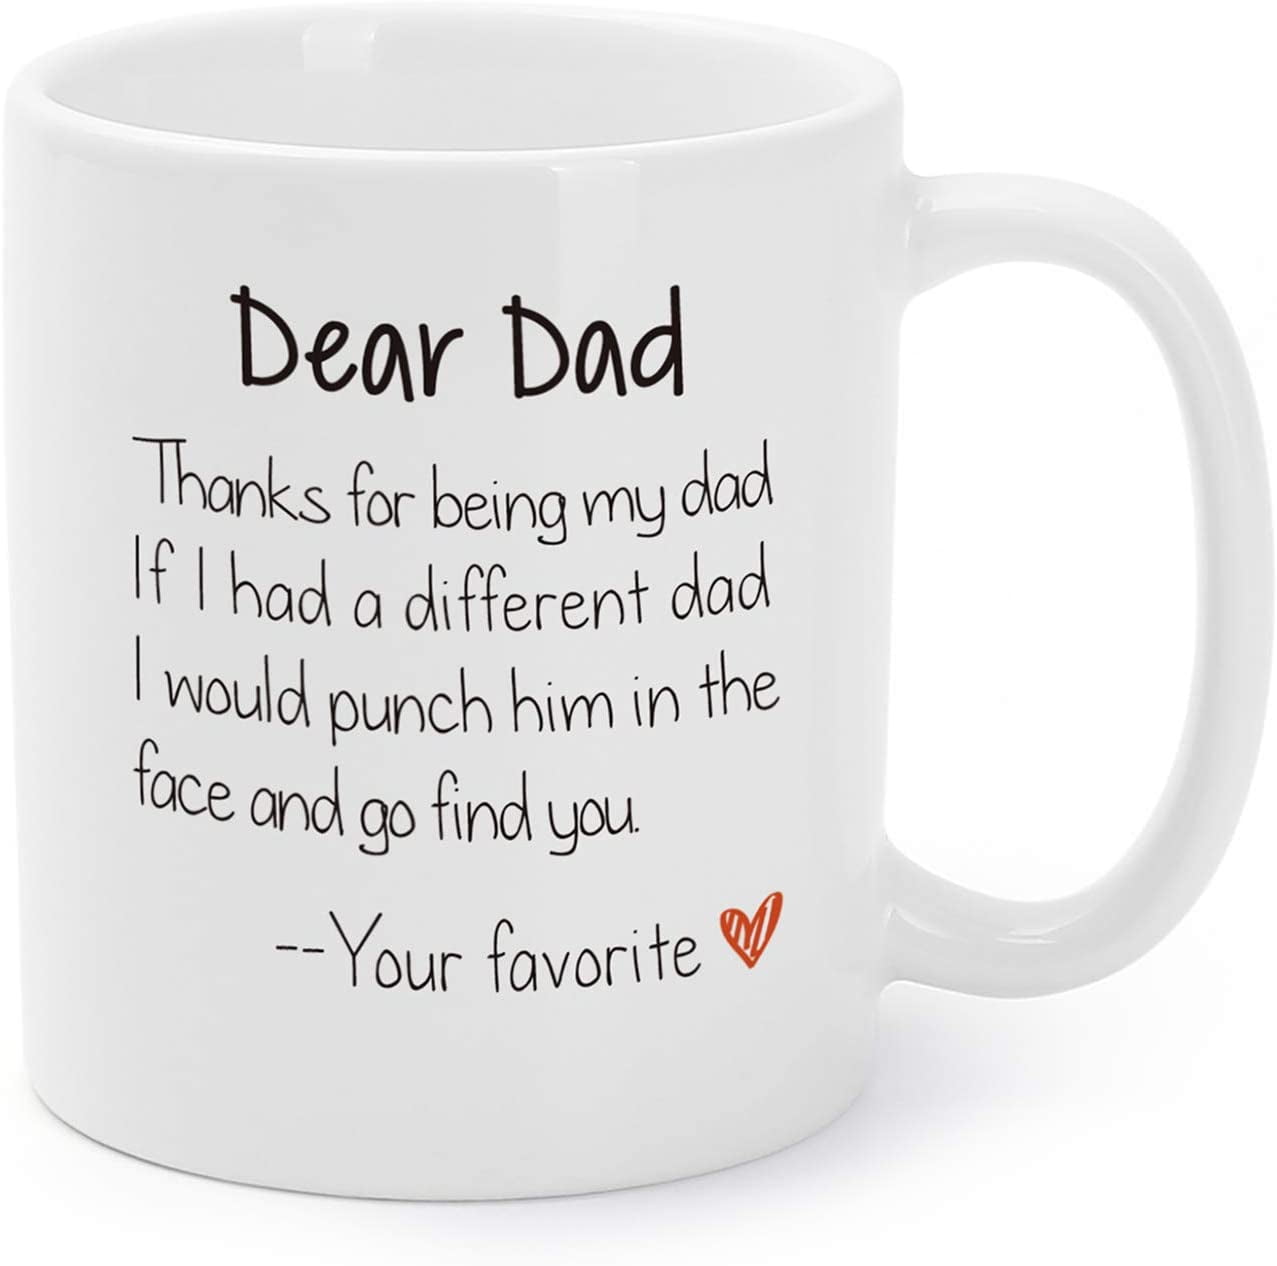 Moms Dads Gifts Mugs Birthday Mothers Fathers Day Christmas Gift Ideas from Daughter Son Kids My Favorite Child Gave Me This Cup 30 oz Black Insulated Stainless Steel Tumbler w/Lid for Mom Dad 